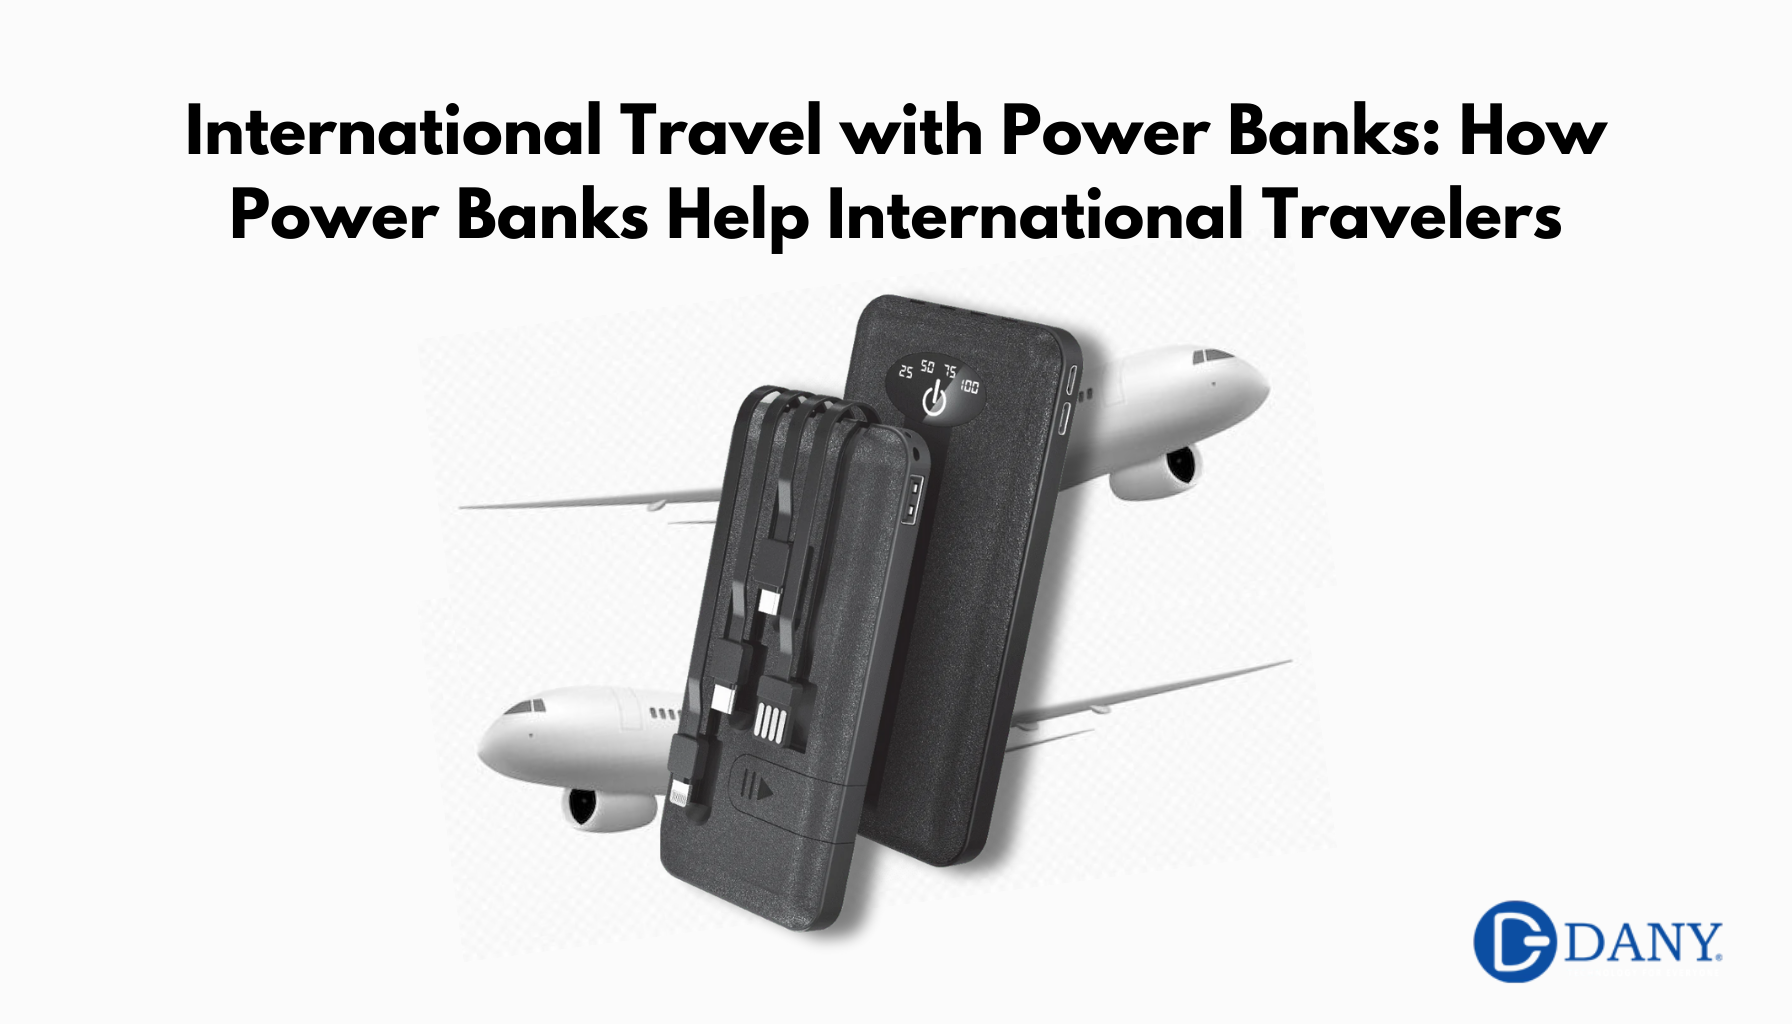 International Travel with Power Banks: How Power Banks Help International Travelers